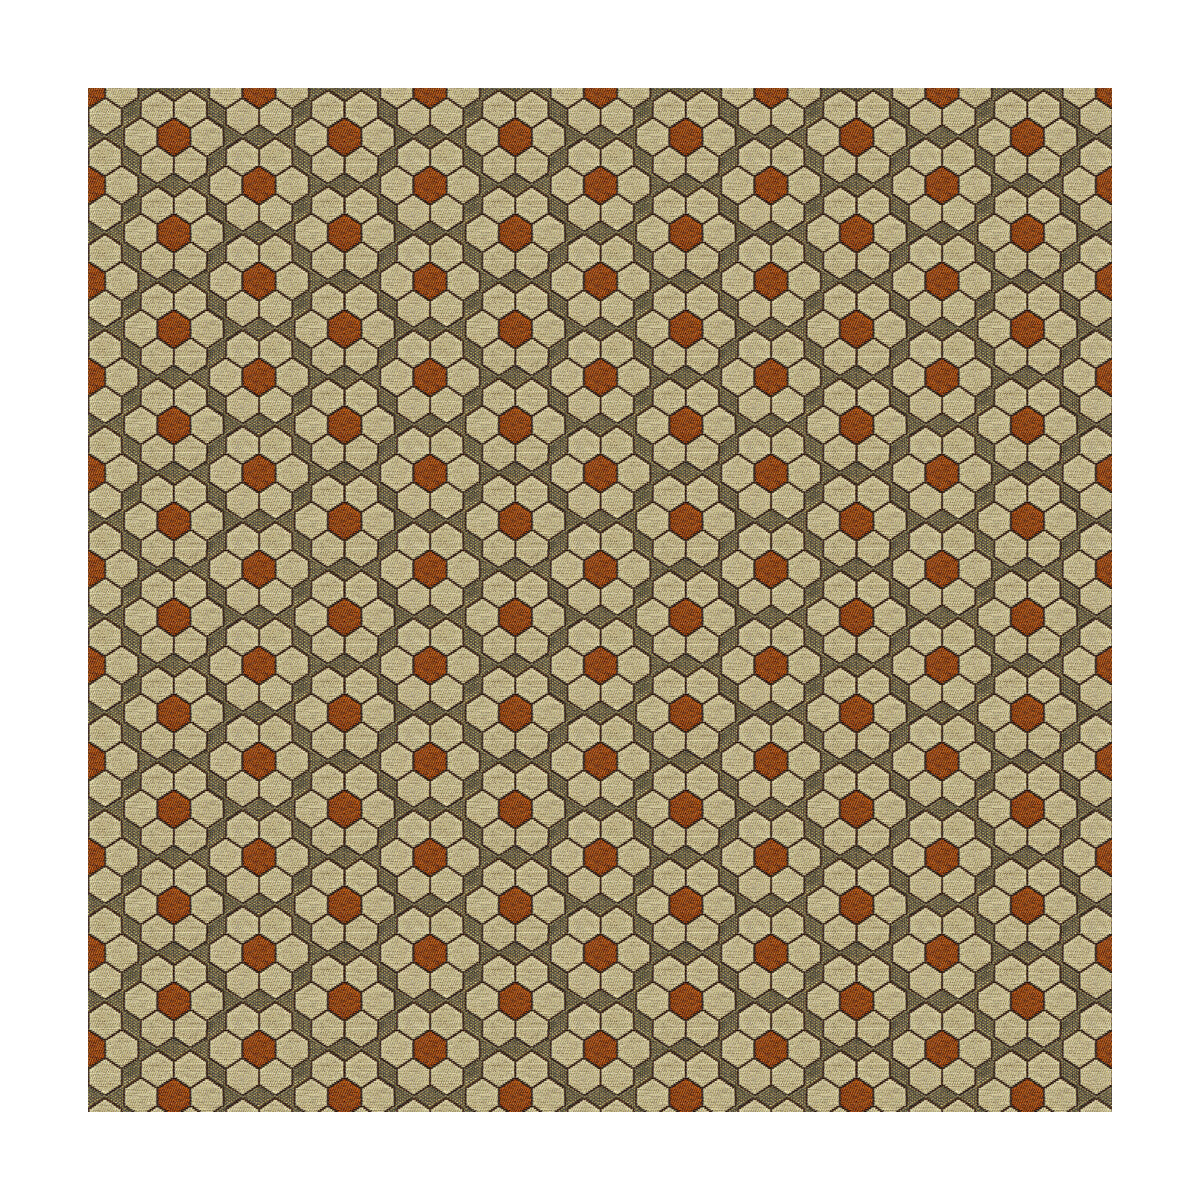 Bursa Mosaic fabric in tigerlilly color - pattern 33943.612.0 - by Kravet Contract in the David Hicks Guaranteed In Stock collection